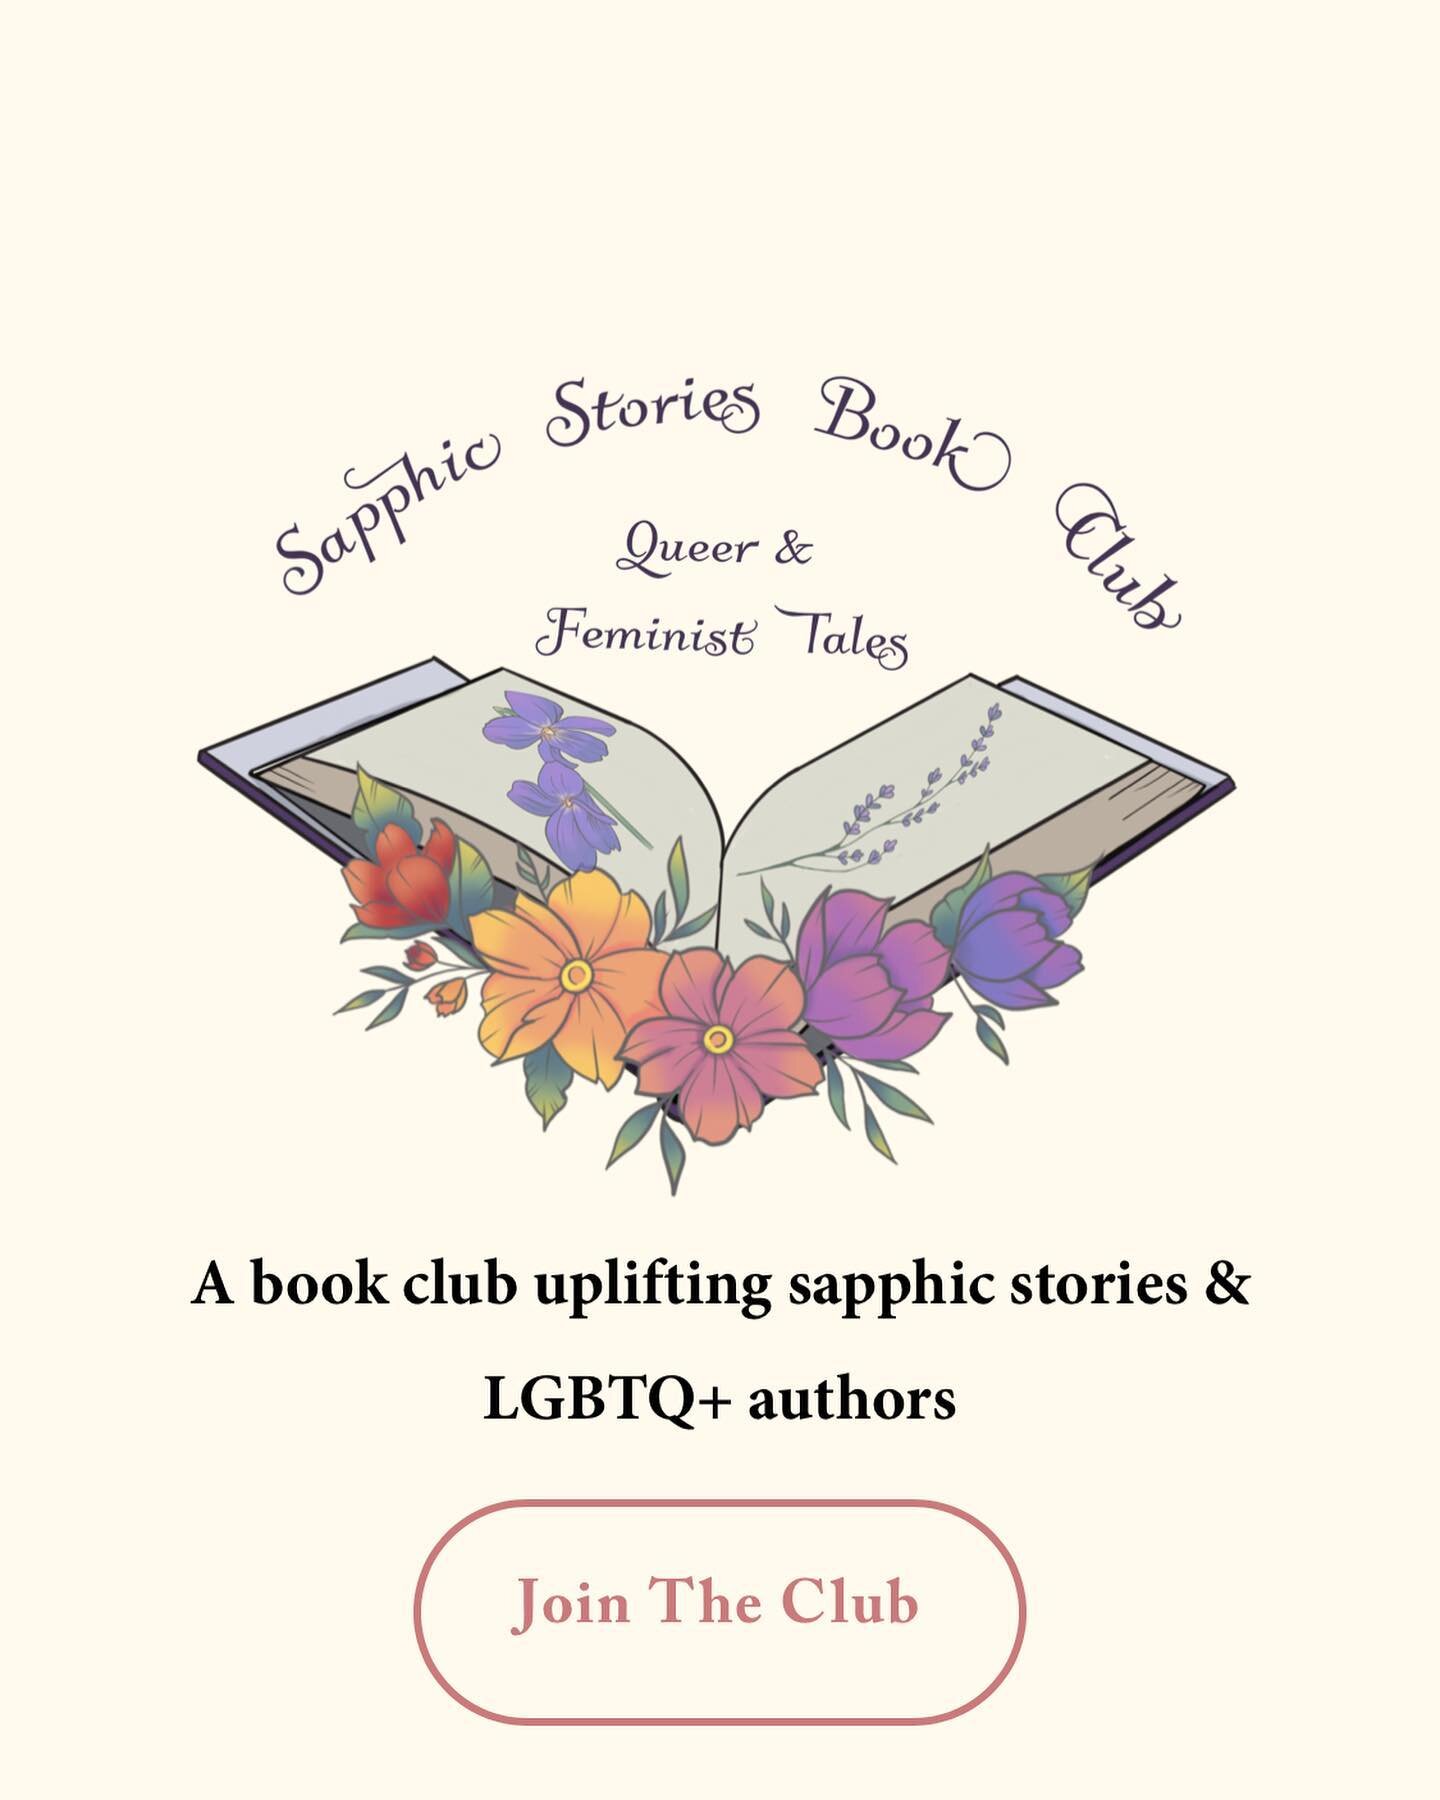 We have a website! ✨

Sapphic Stories Book Club officially has a portal on the aliyabreehall.com website, where you can find information on how to join the club, book picks from every year, and author profiles! 

A special thank you to my fianc&eacut